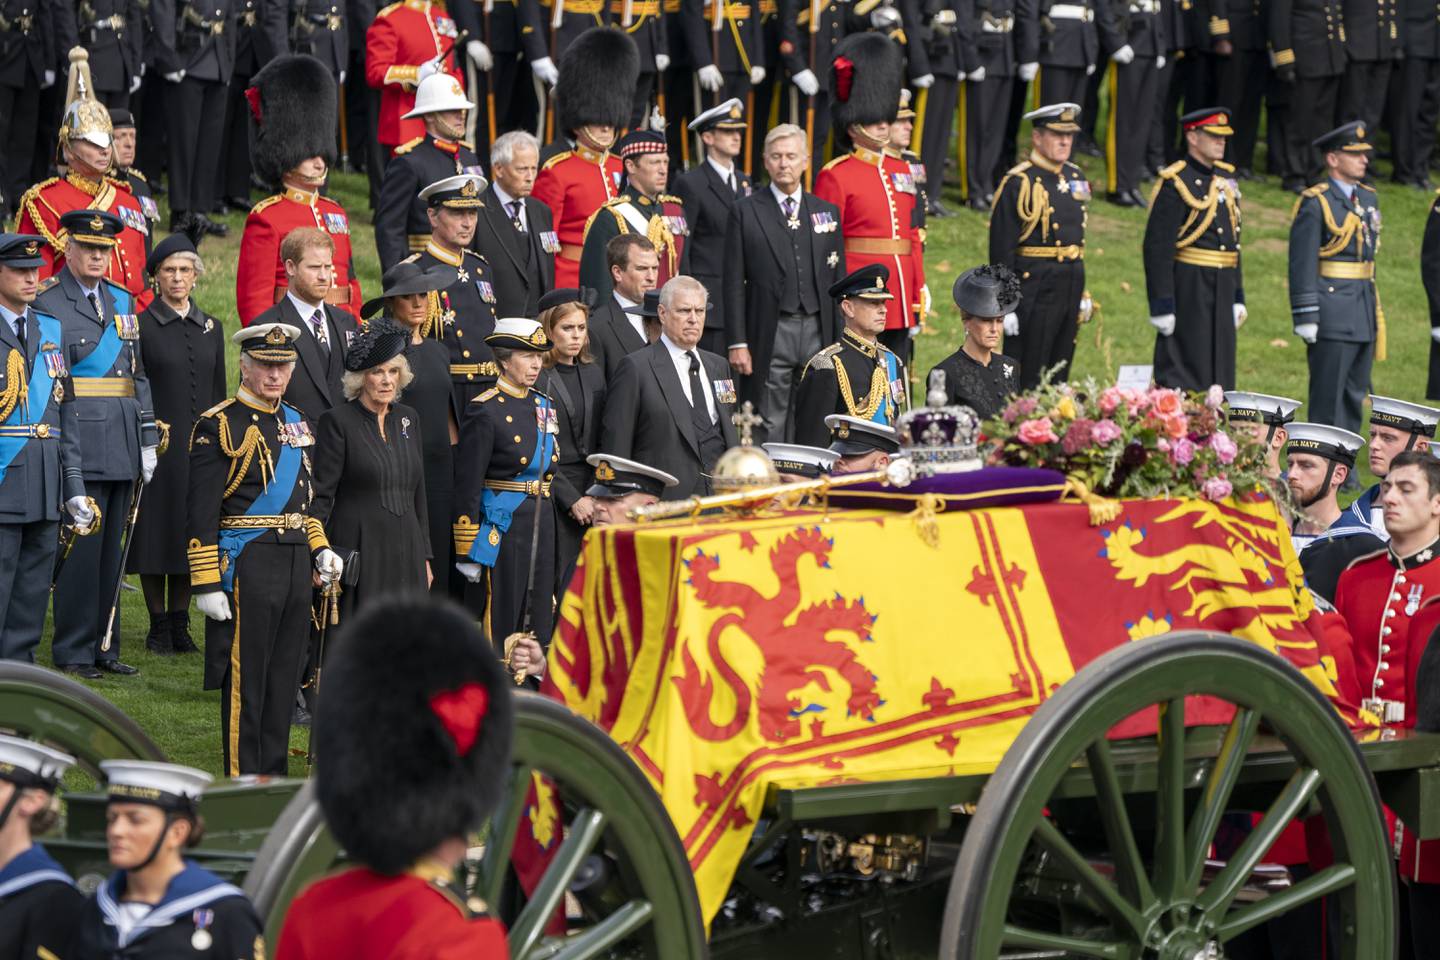 King Charles III, the Duke of Sussex, Queen Consort Camilla, the Duchess of Sussex, the Princess Royal, Princess Beatrice, Peter Phillips, the Duke of York, the Earl of Wessex and the Countess of Wessex look on as the State Gun Carriage carrying the coffin of Queen Elizabeth II arrives at Wellington Arch.